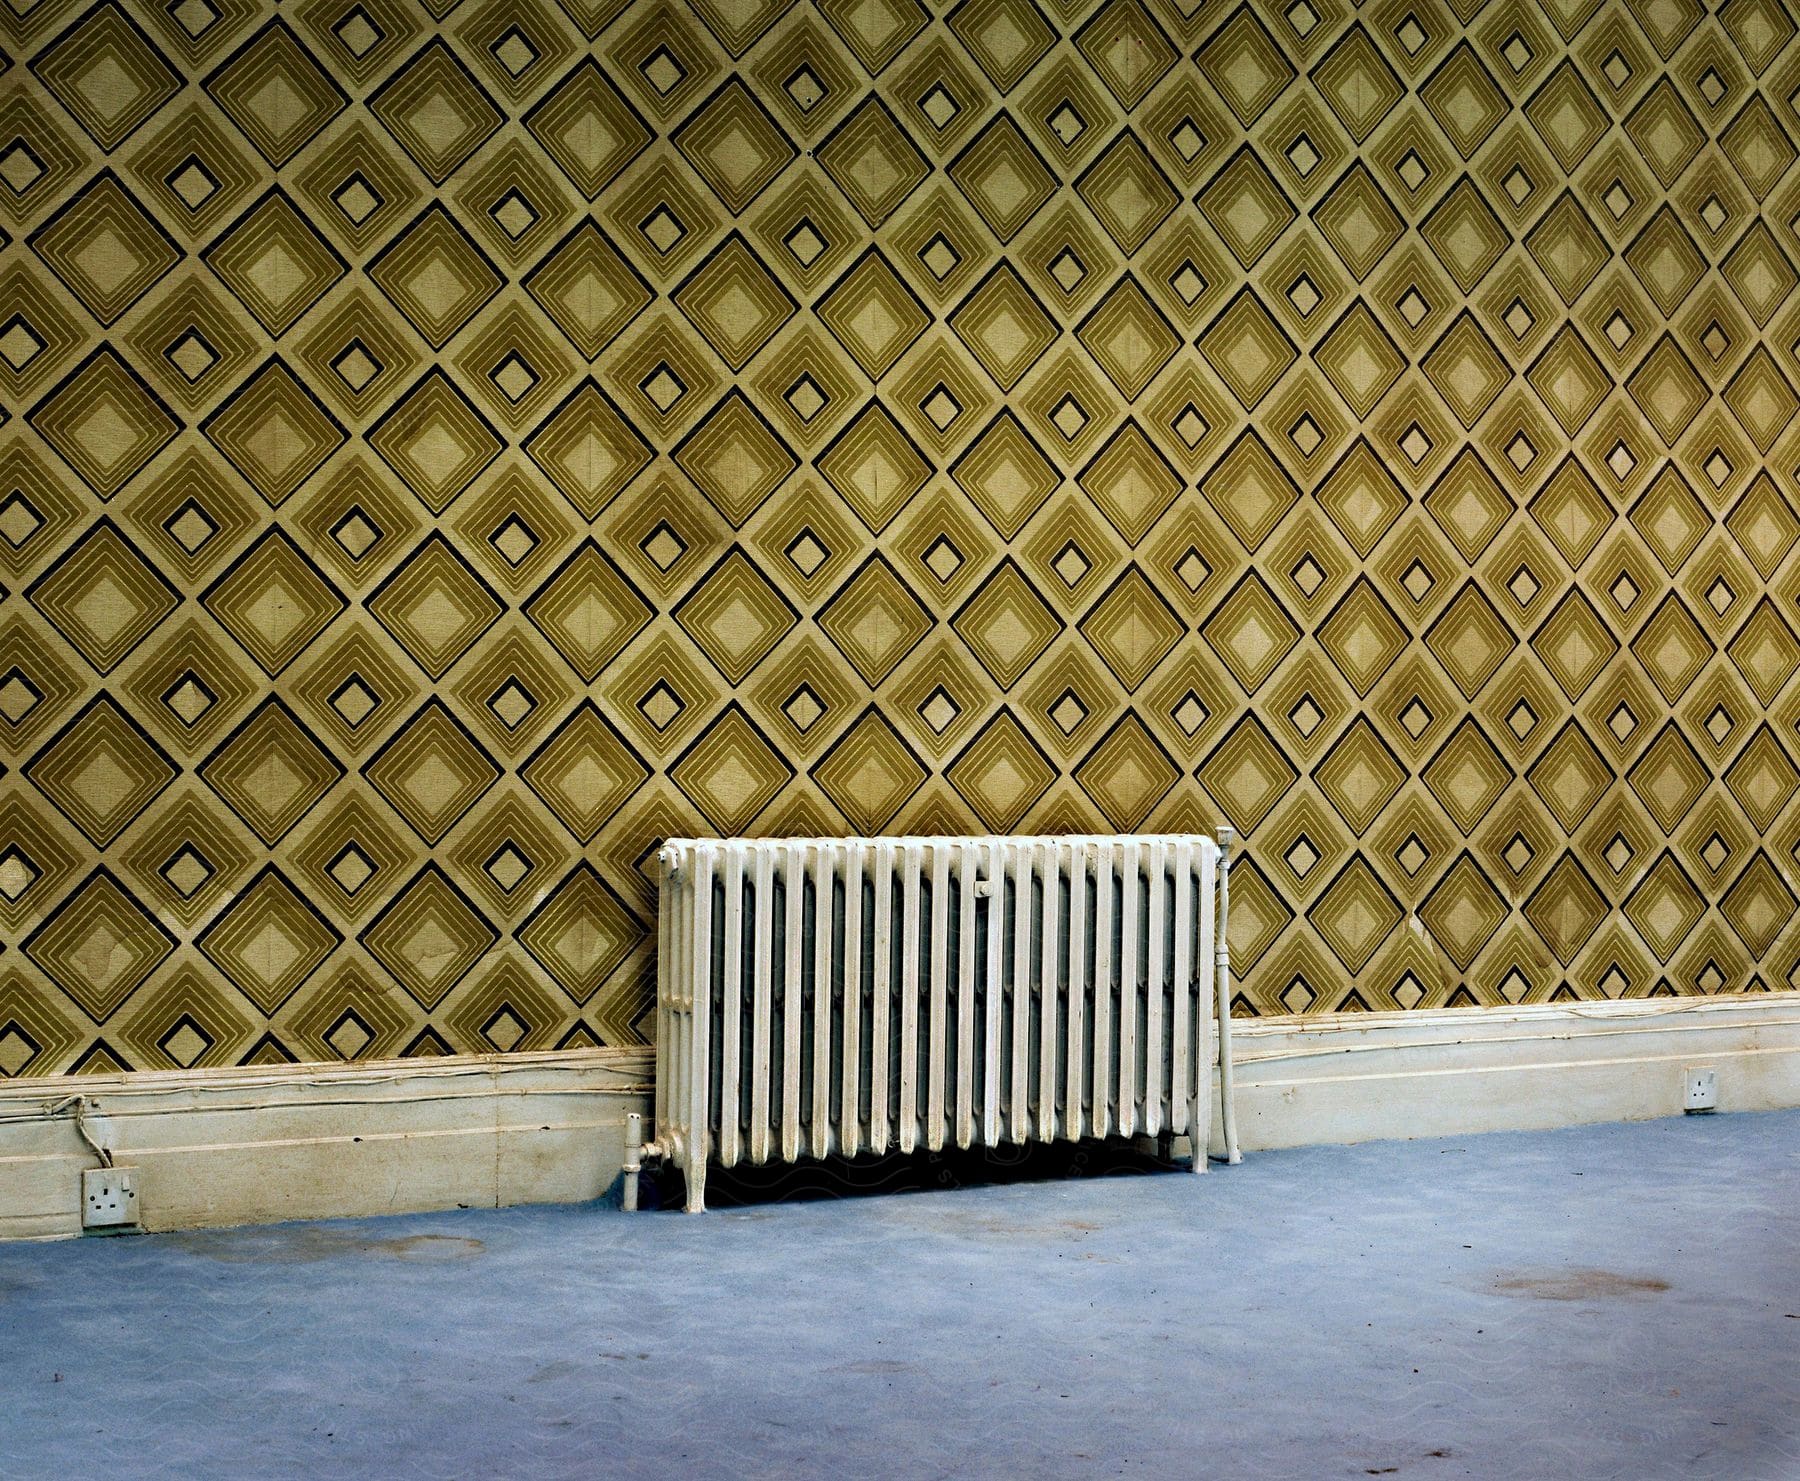 Wall with heater and wallpaper with triangular shapes in an interior space